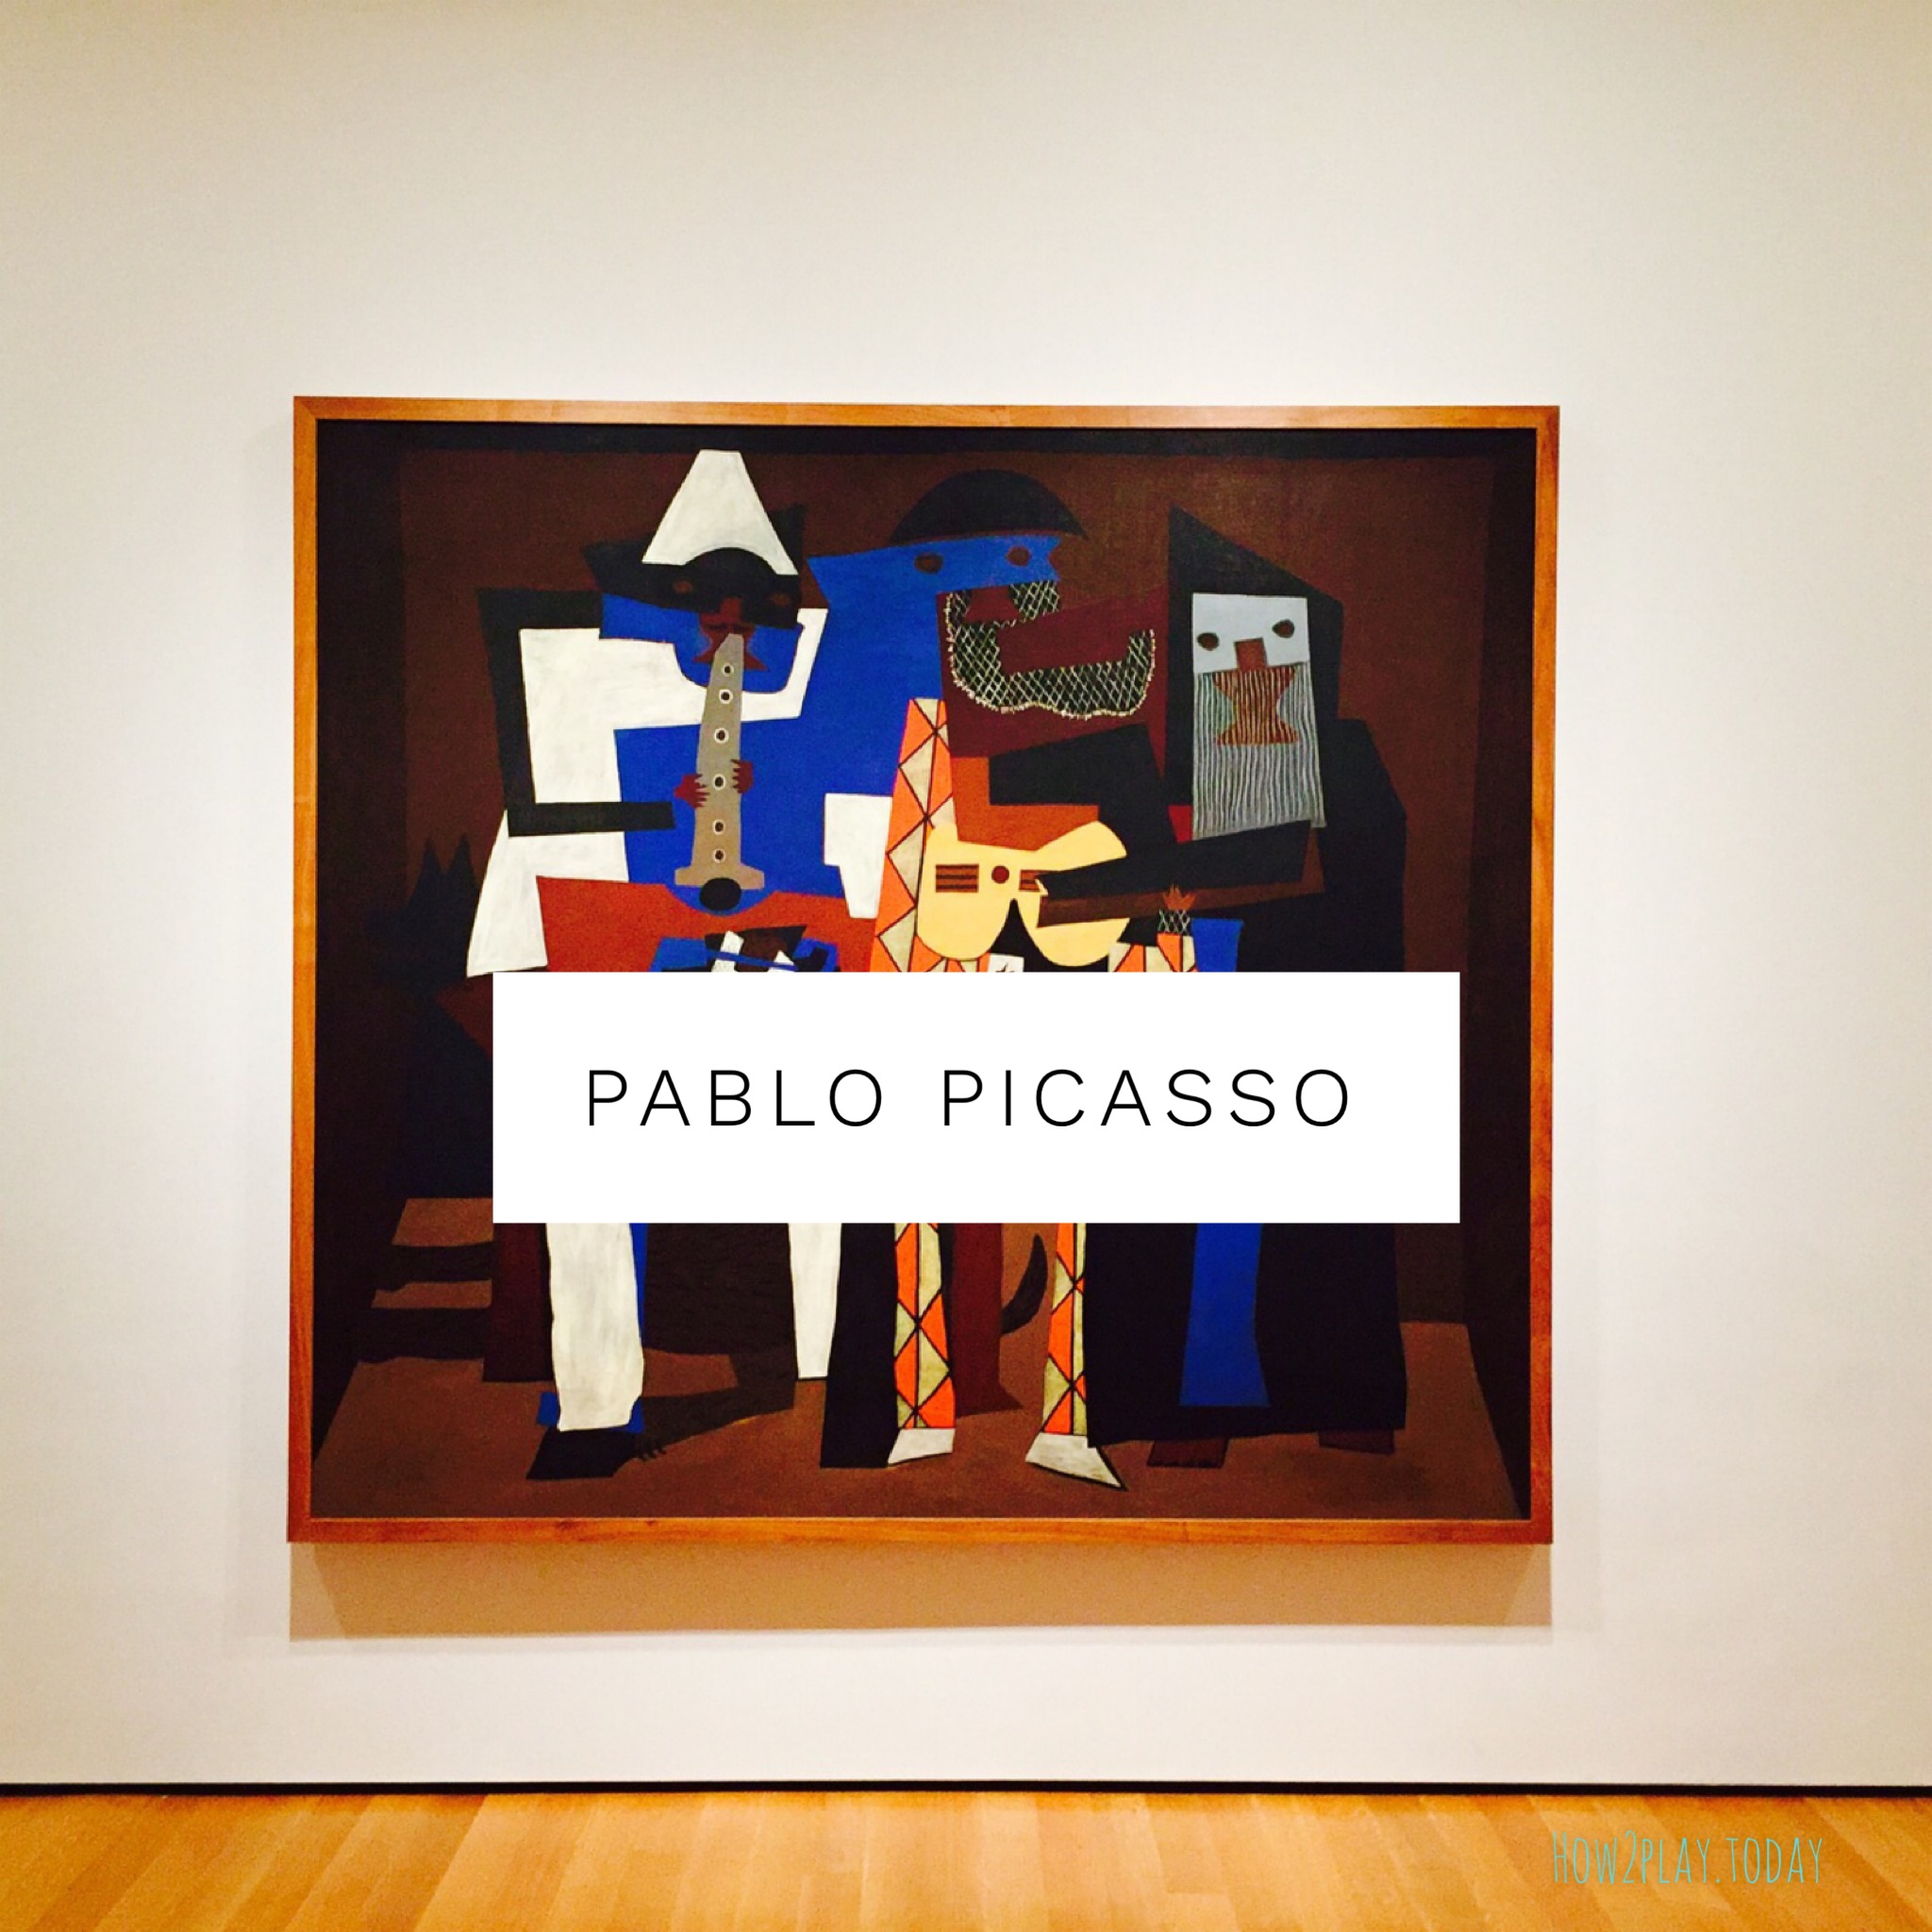 Pablo Picasso inspired art learning / lesson plans for kids. Come explore Cubism for preschool and elementary age children. Children will learn Elements of Art, Principles of Design while having the freedom of creative expression.